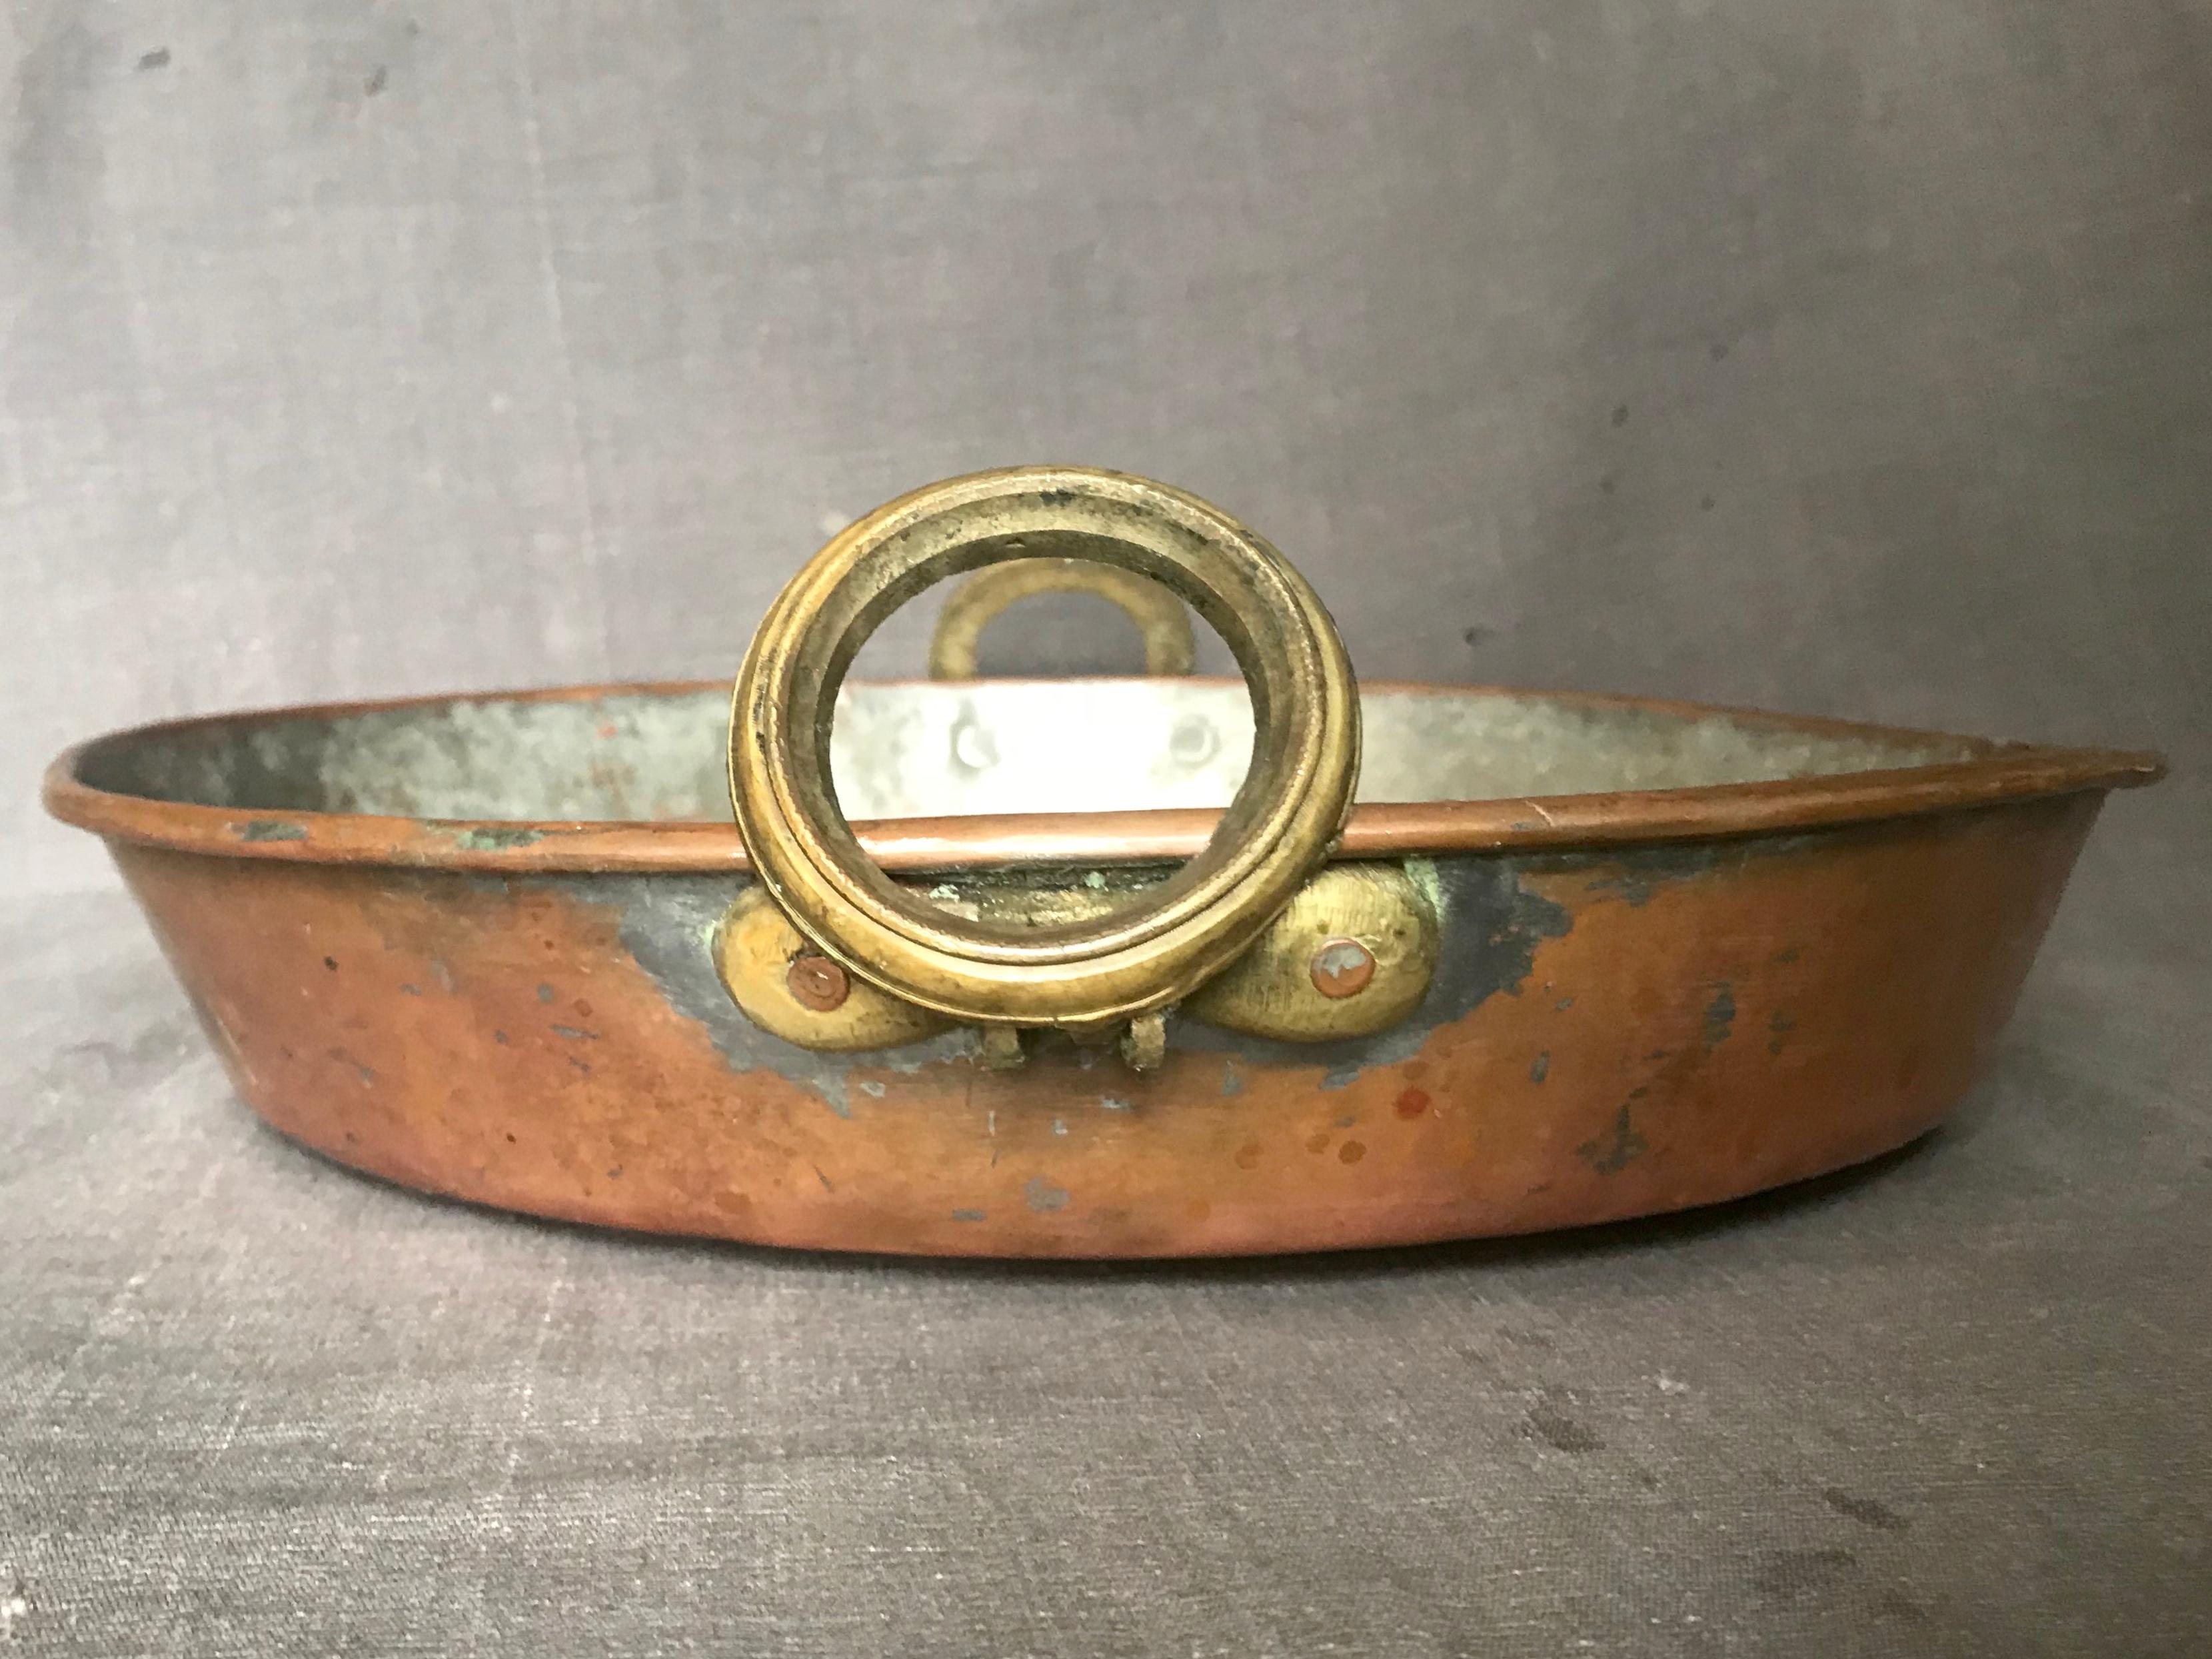 Brass handled copper pot / braising pan. Large antique copper pot / braising pan with copper plating and brass ring handles. Possibly French. Continental, late 19th century.
Dimensions: 19” width handle to handle x 2.75” height, 14.25” diameter.